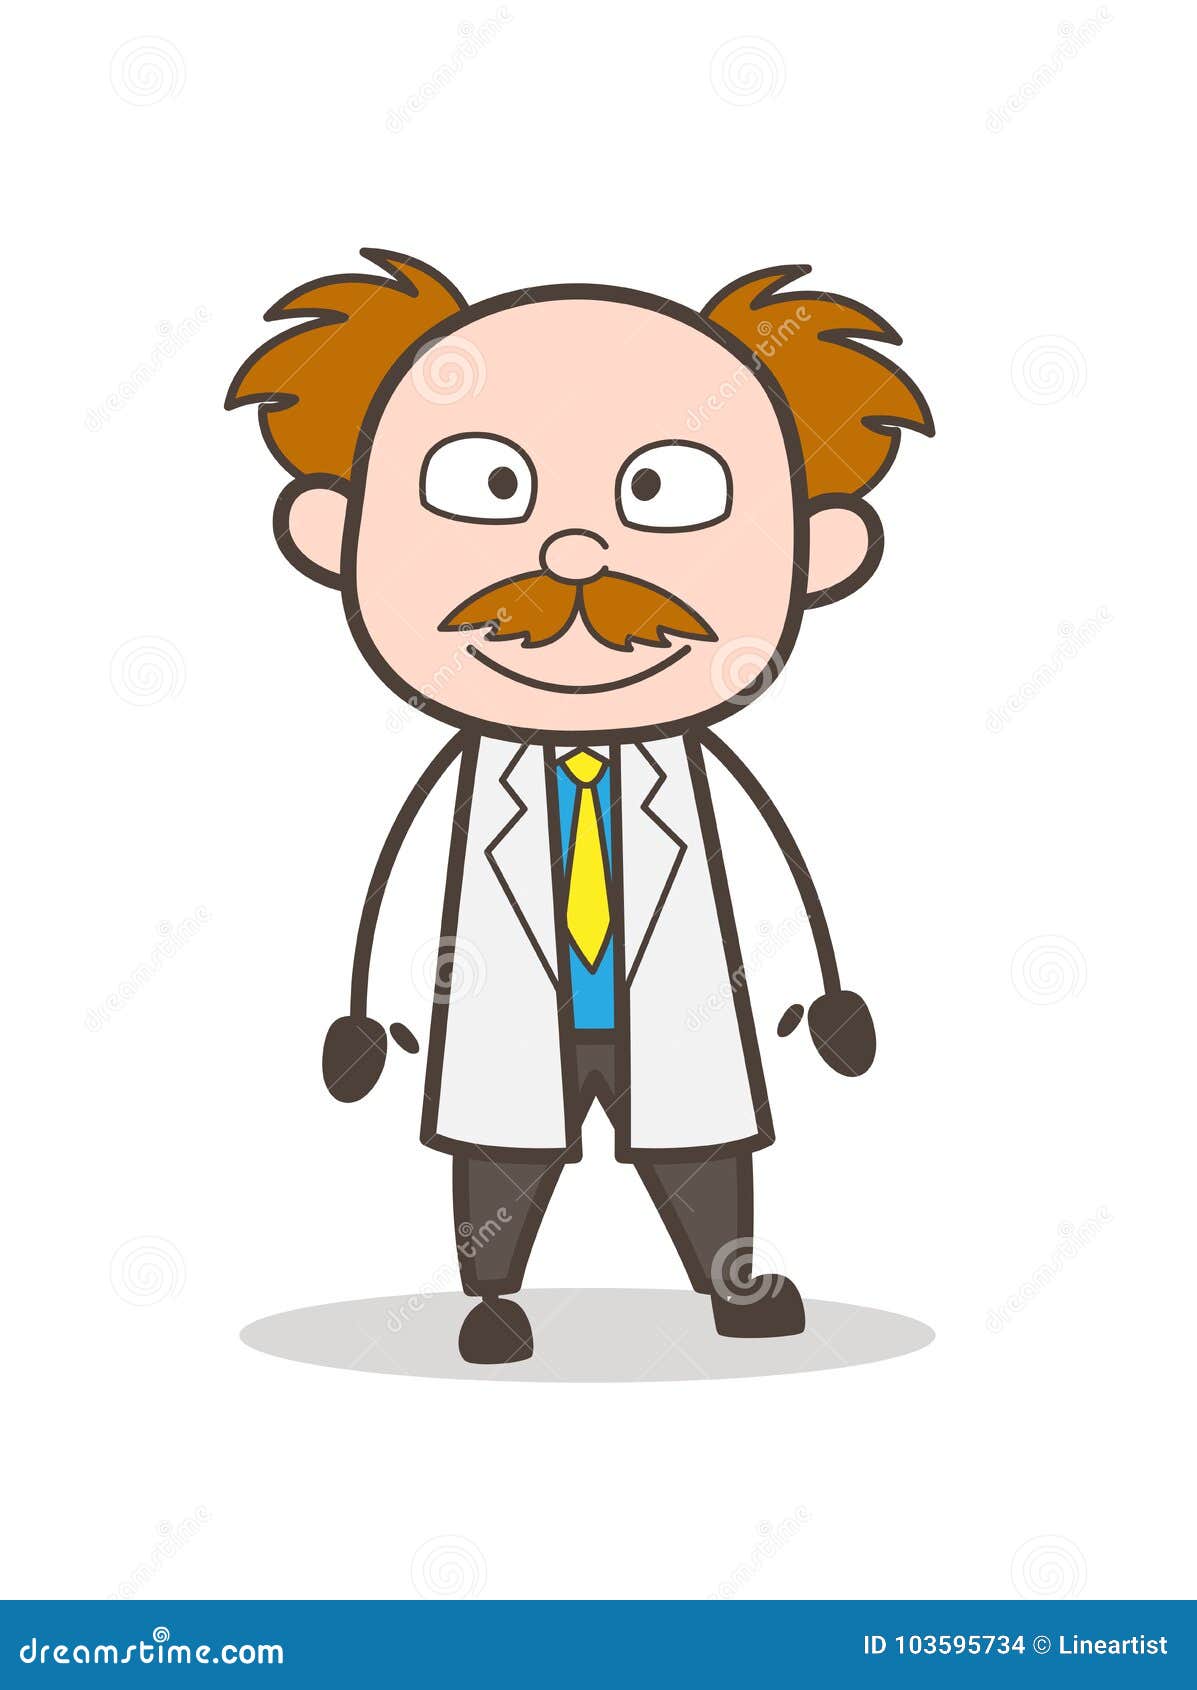 3 Cute Cartoon Scientists T Pose Stock Vector (Royalty Free